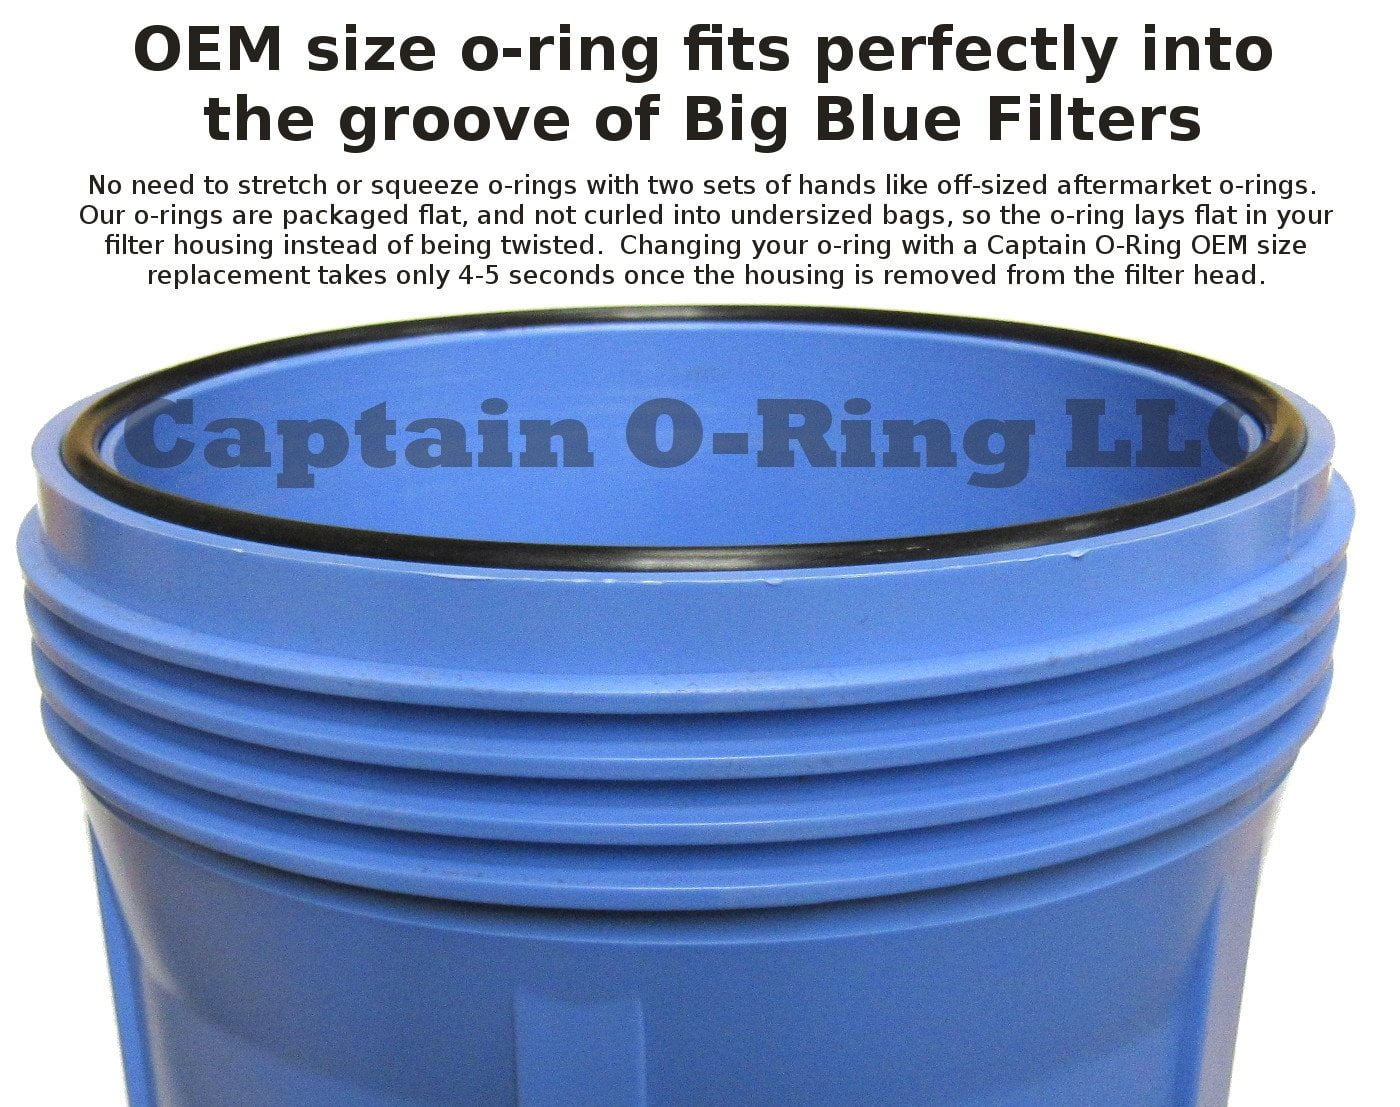 O-Rings for Big Blue Water Filter Housing Sizes 10" and 20" X 4.5" 3 Pcs